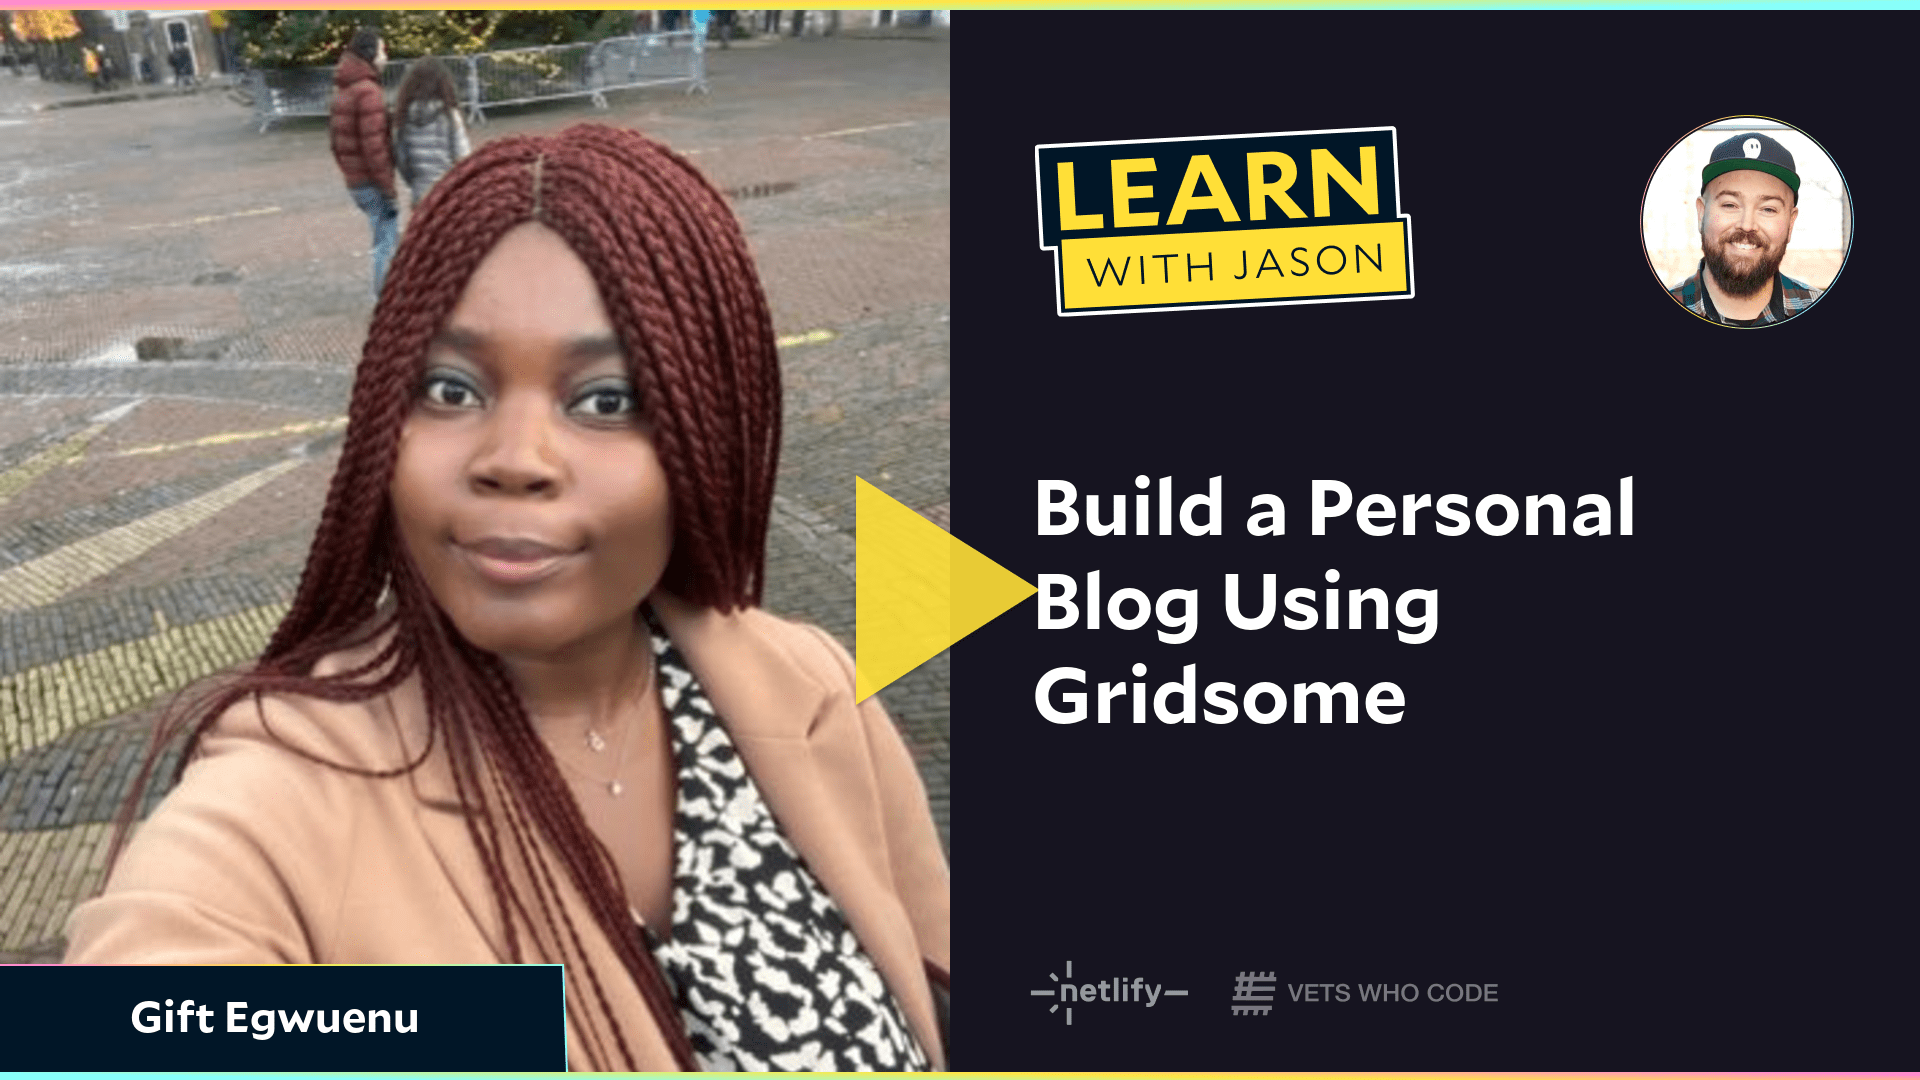 Build a Personal Blog Using Gridsome (with Gift Egwuenu)